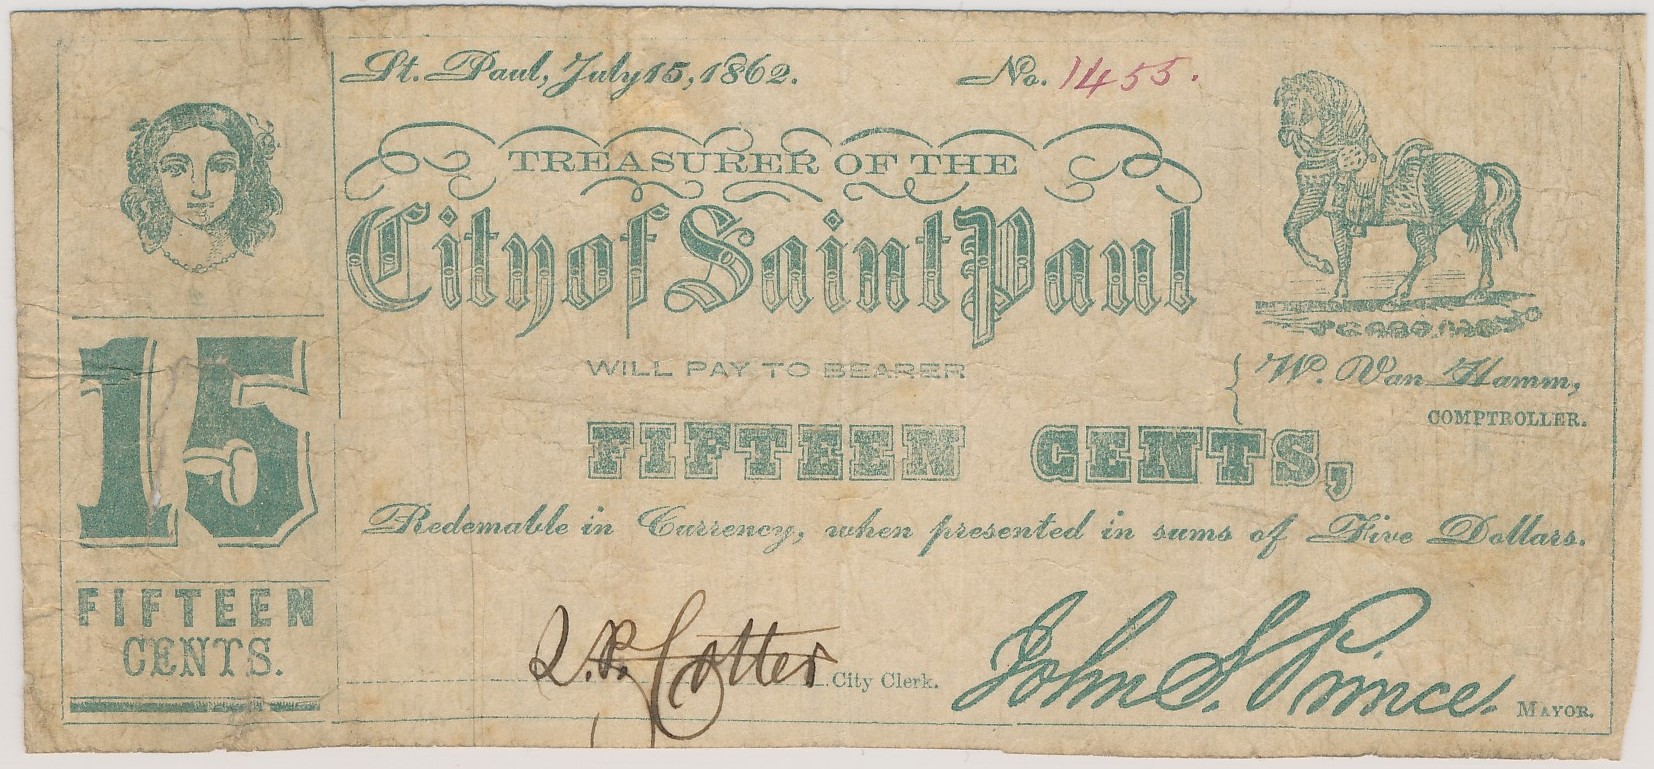 $.15 Treasurer of the City of Saint Paul (First Issue)